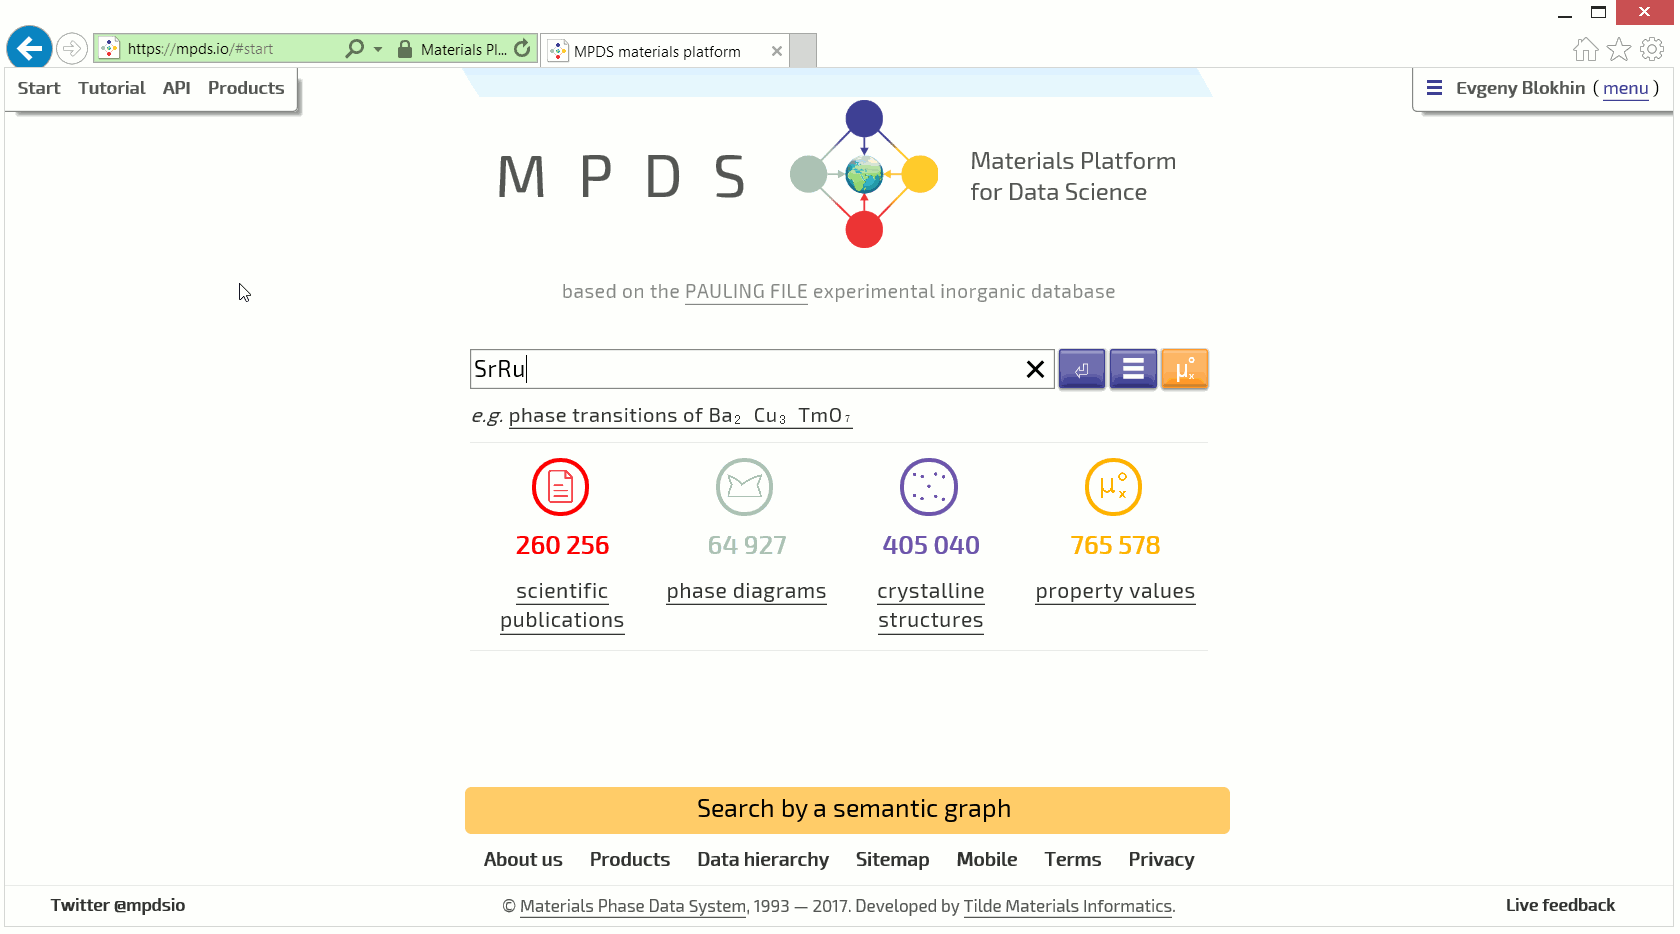 Rich MPDS web-interface: using the graph to refine the search